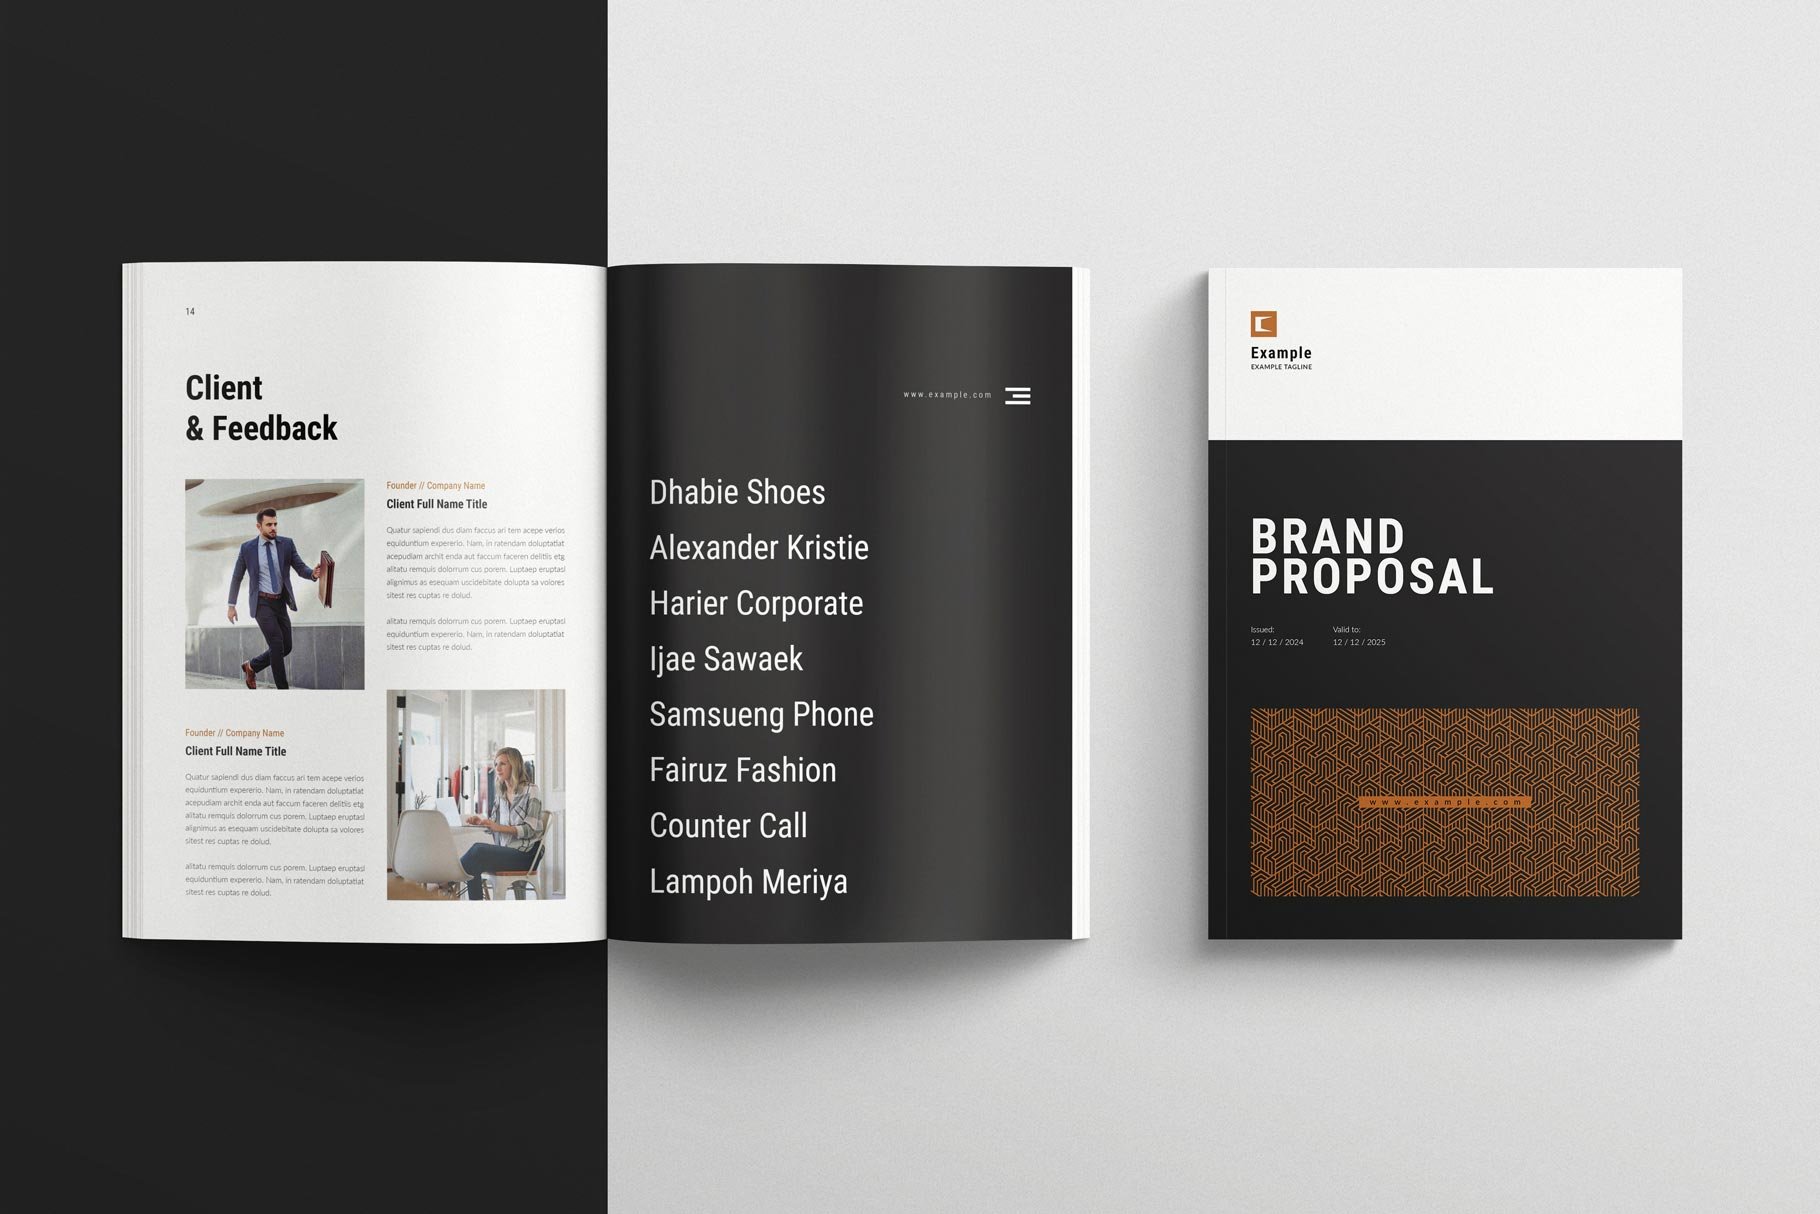 Brand Proposal Template cover image.